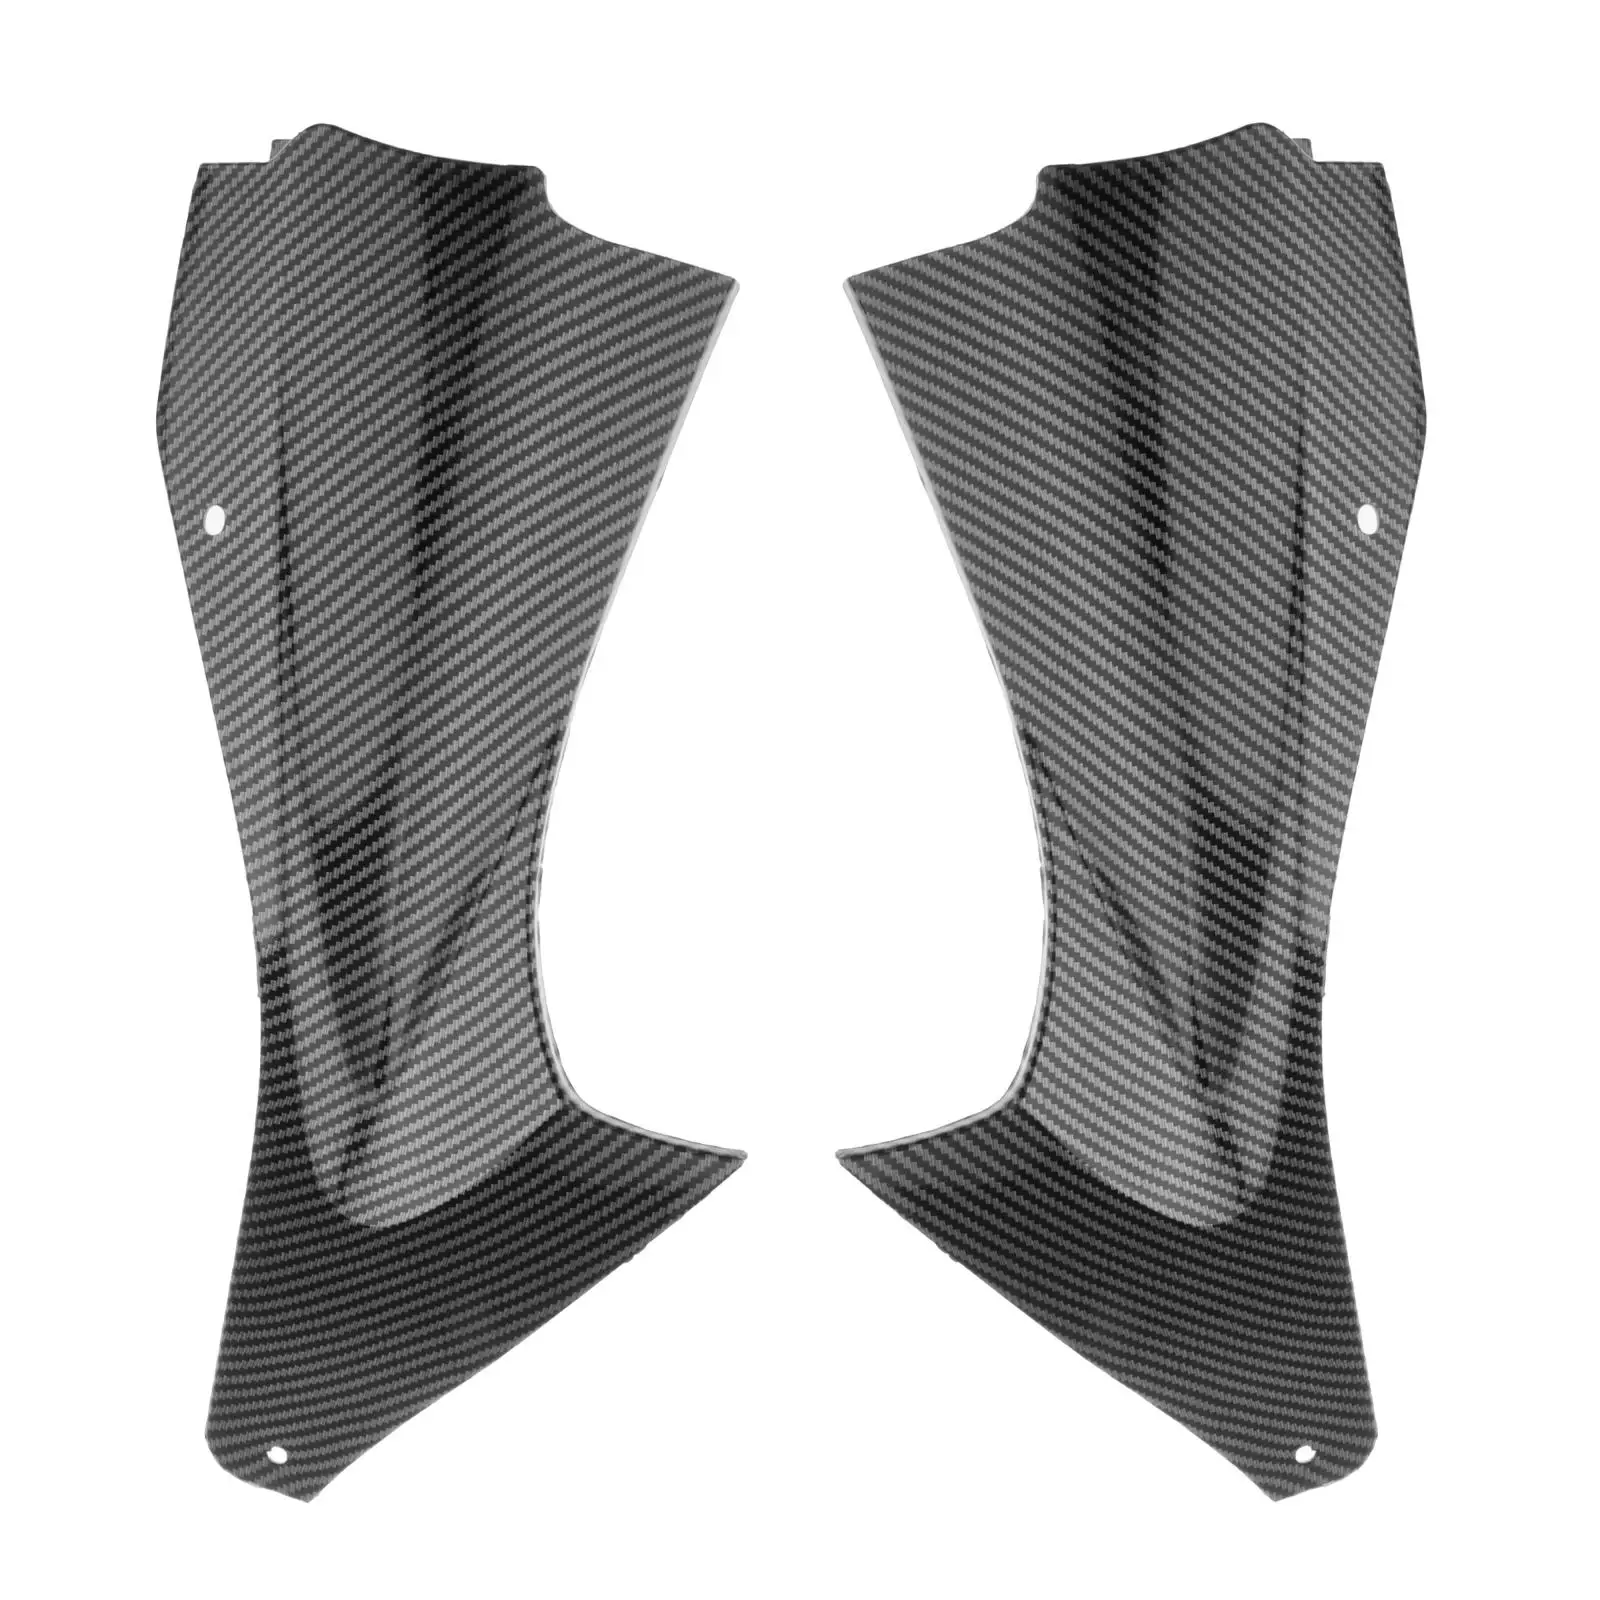 1 Pair of Side Air Duct Covers for Yamaha R6 2008-2014 Accessories